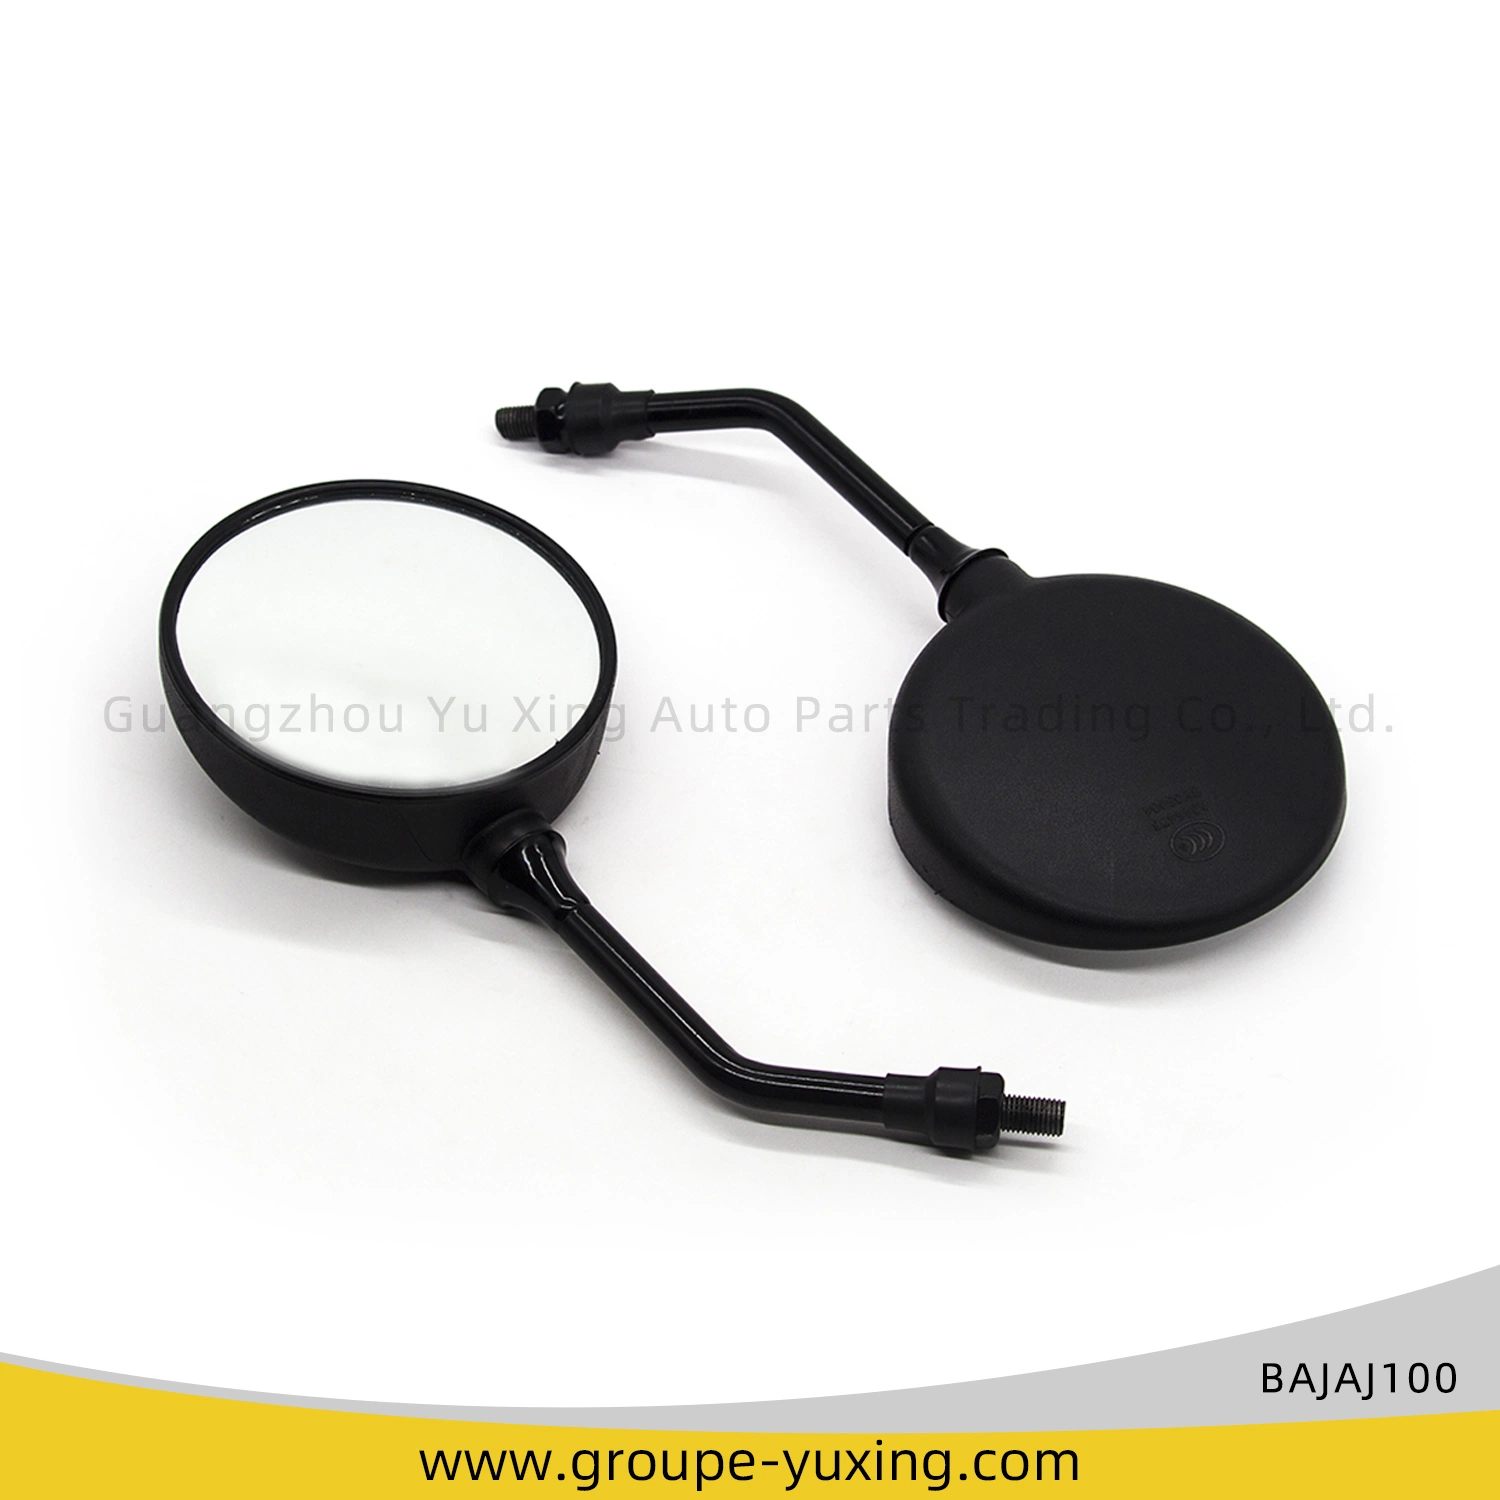 Good Quality Scooter Round Rearview Mirror Motorcycle Rear View Mirror for Bajaj100